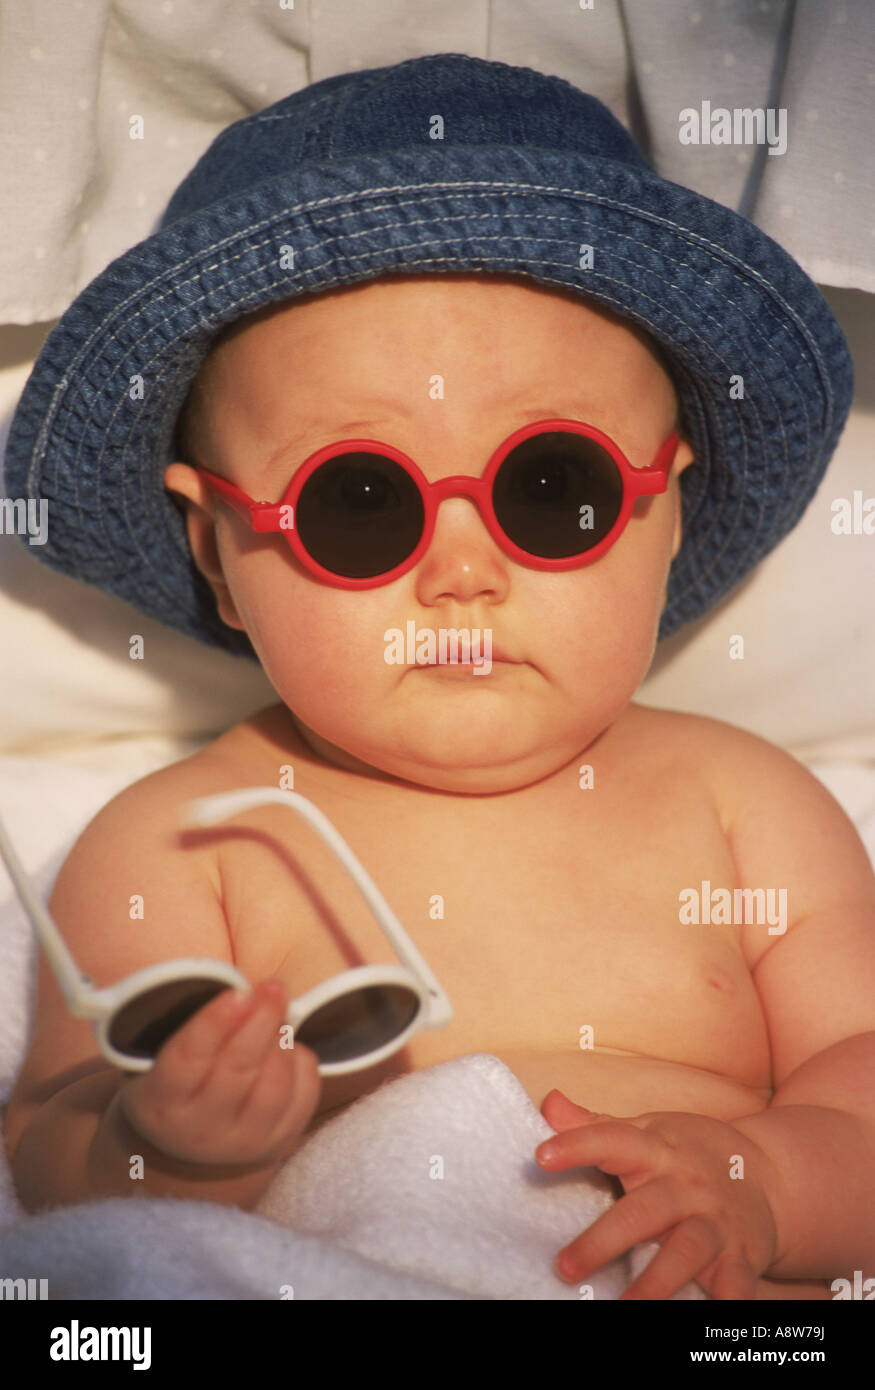 Baby looking cute in cool sunglasses and hat Stock Photo - Alamy